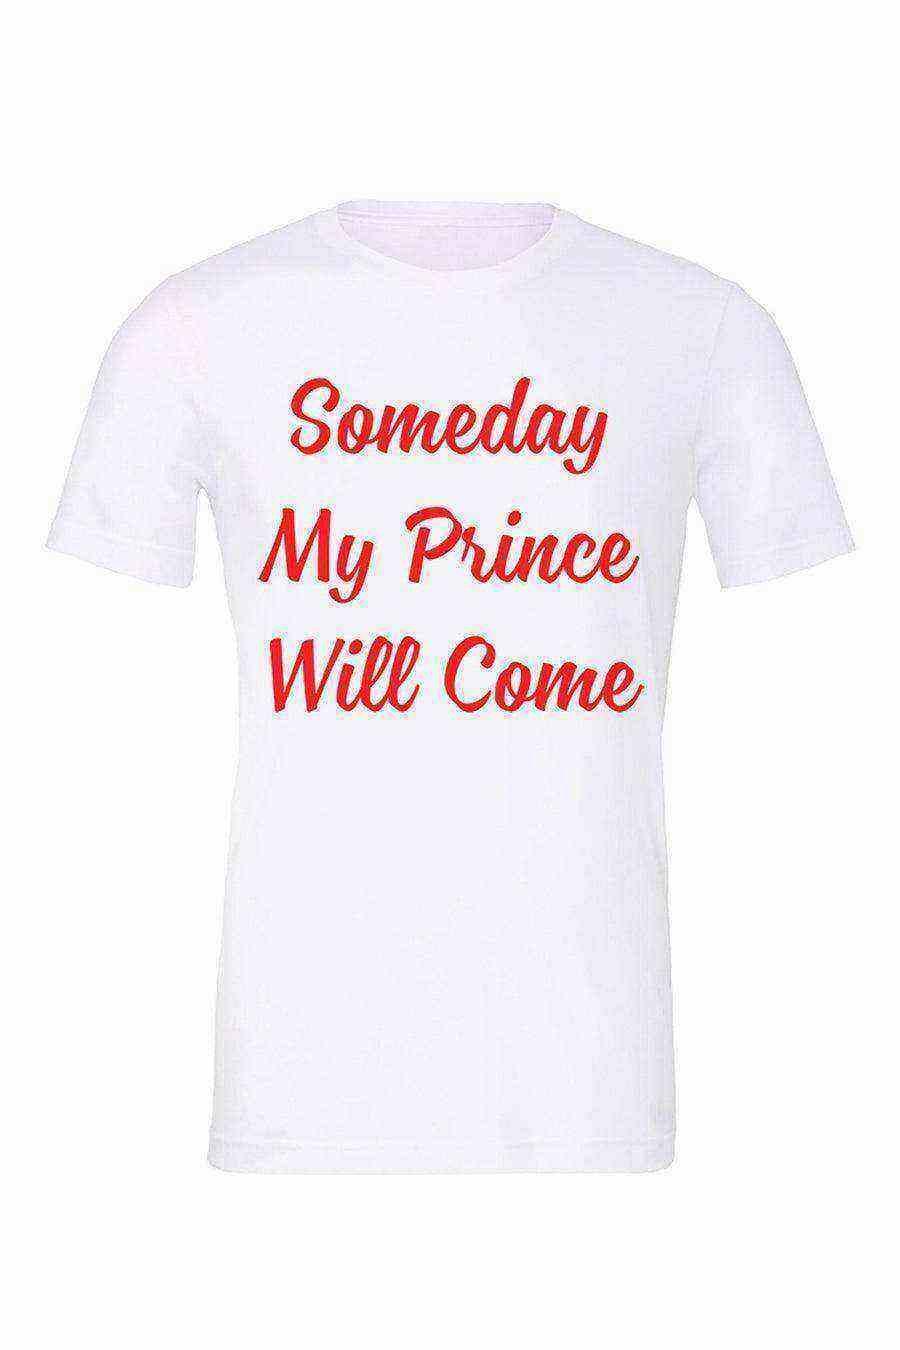 Womens | Some Day My Prince Will Come Tee - Dylan's Tees